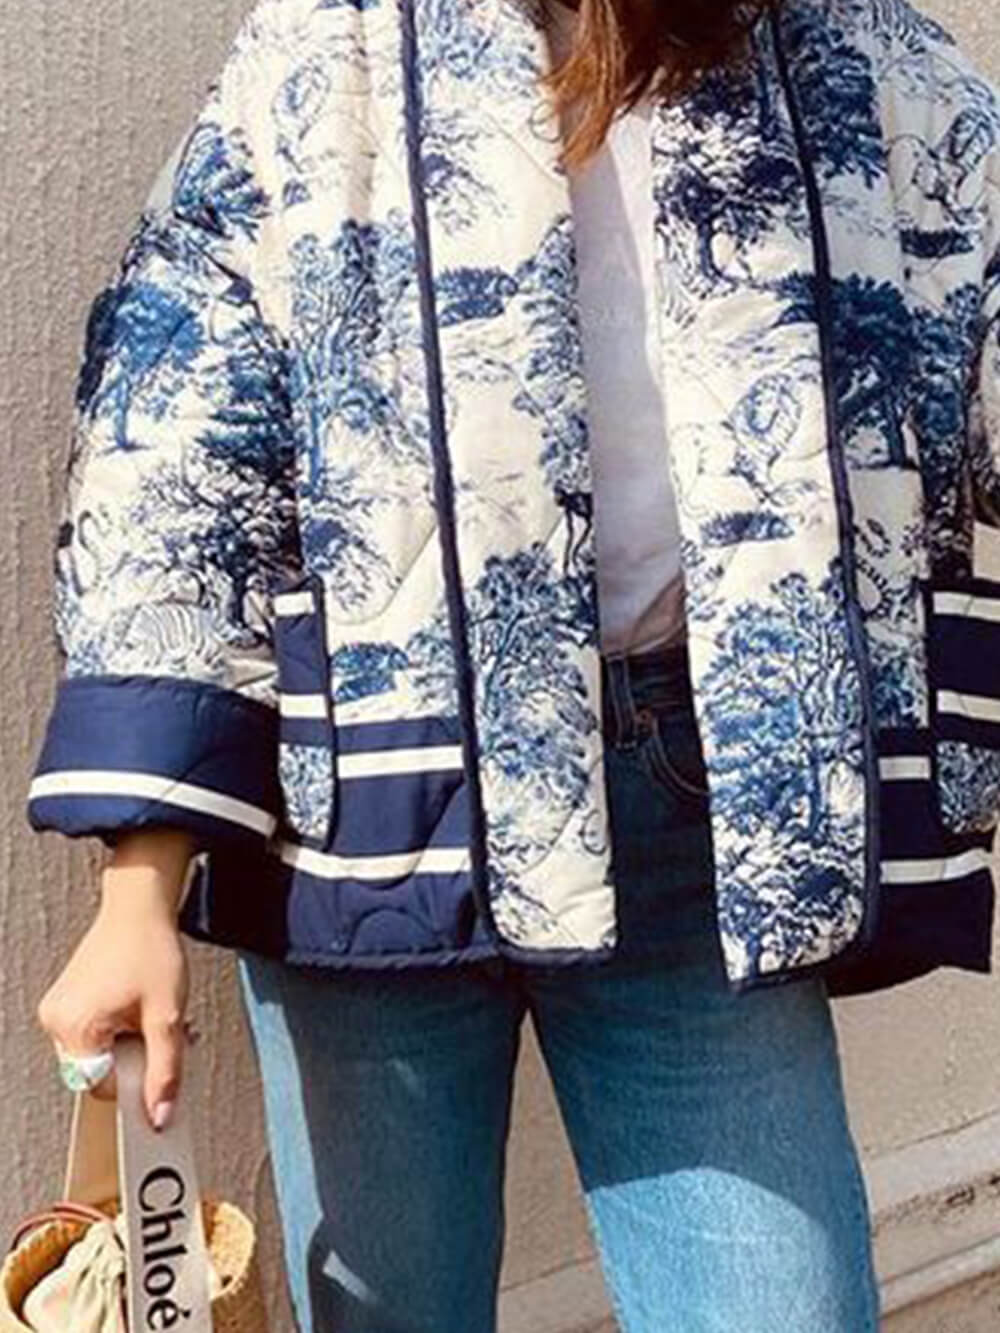 Printed Cotton-Padded Jacket With Double Pockets